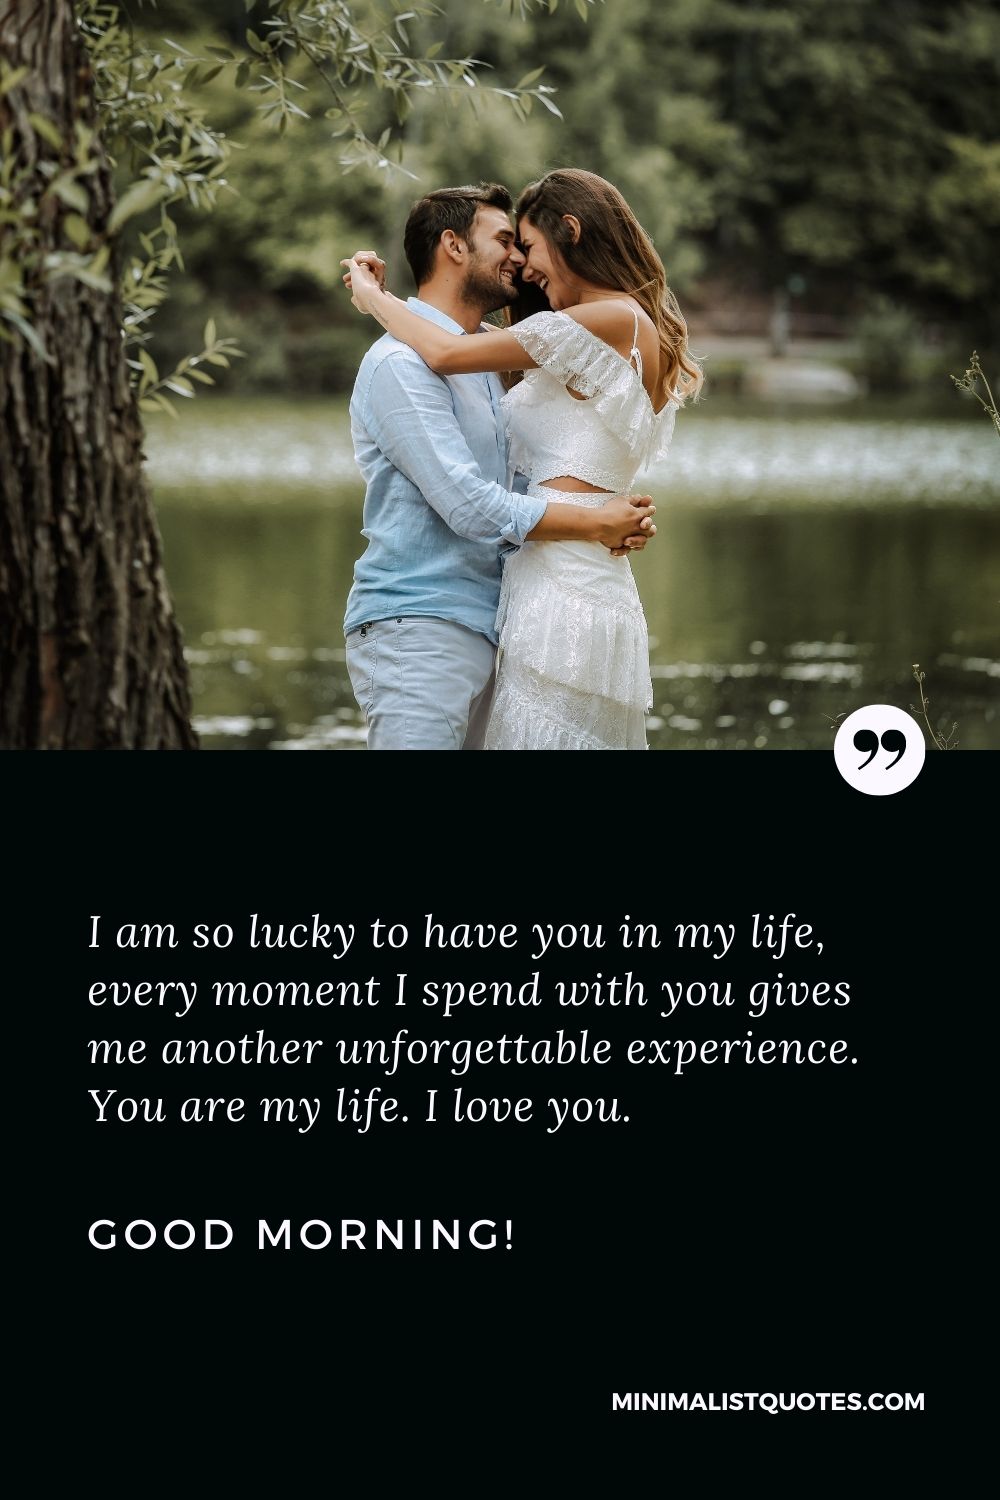 Good morning messages for him that touches the heart: I am so lucky to have you in my life, every moment I spend with you gives me another unforgettable experience. You are my life. I love you. Good Morning!